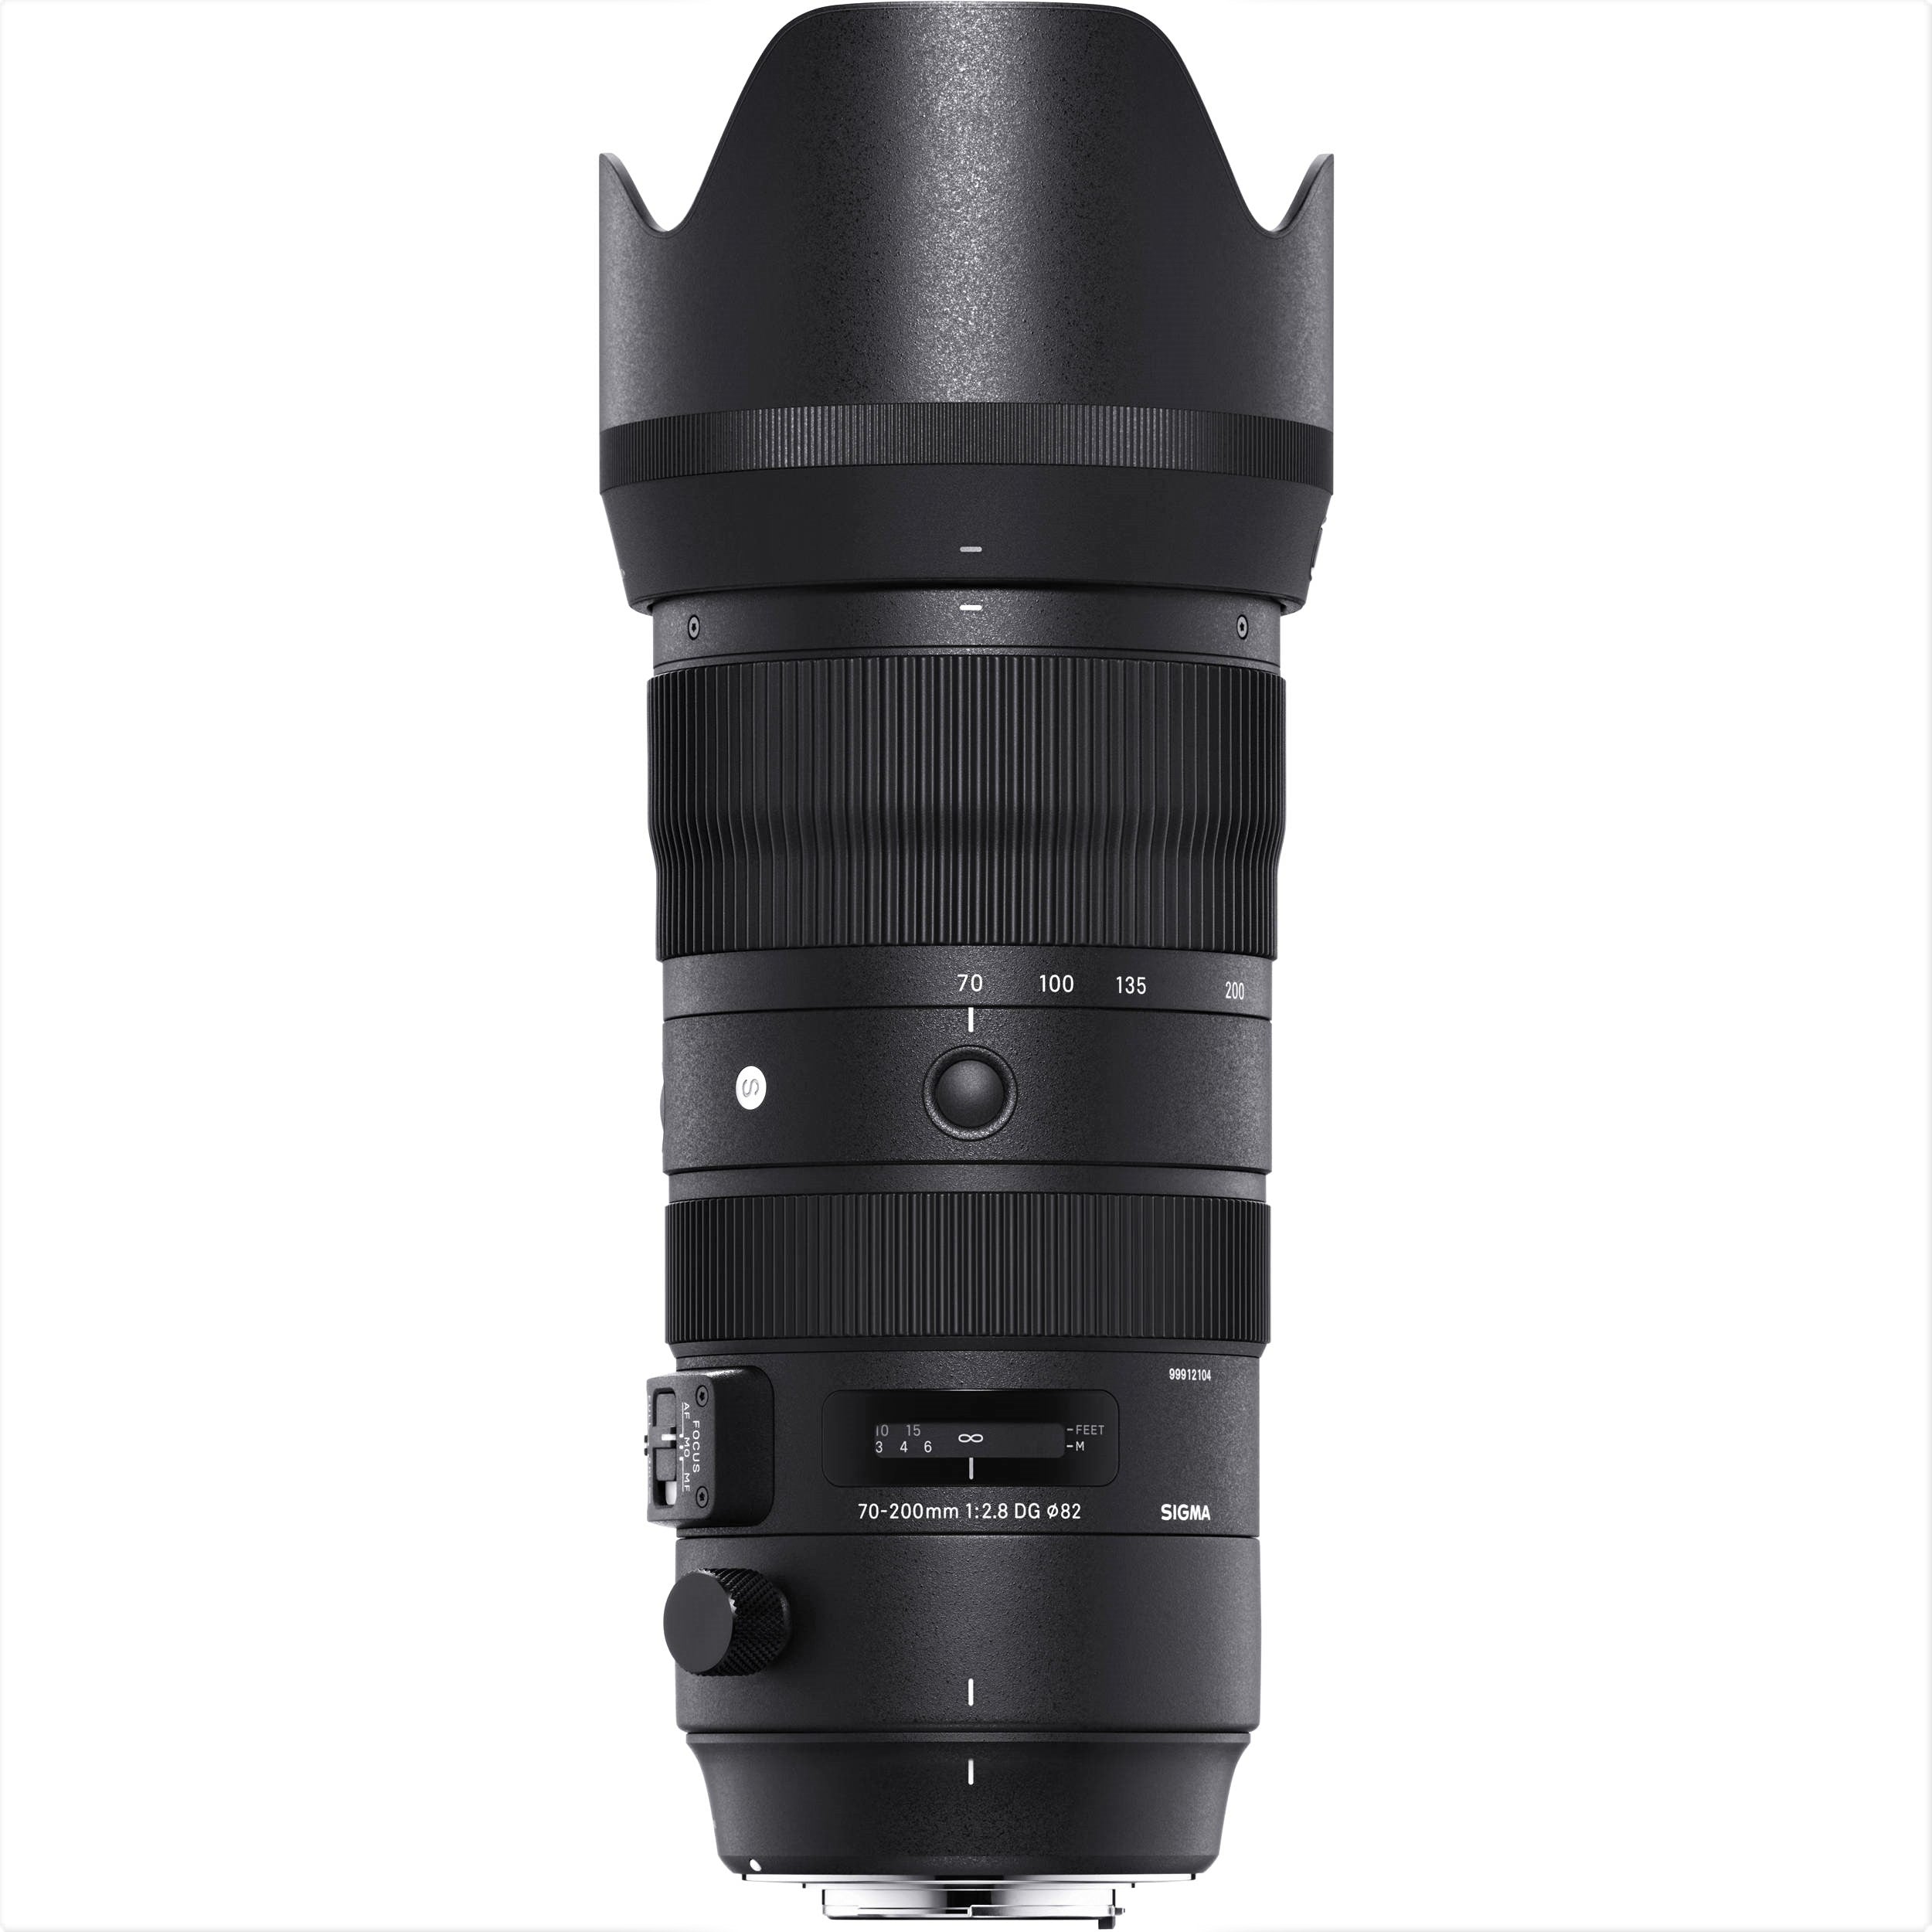 Sigma Lens Hood Attached to 70-200mm F2.8 EX DG OS HSM Lens